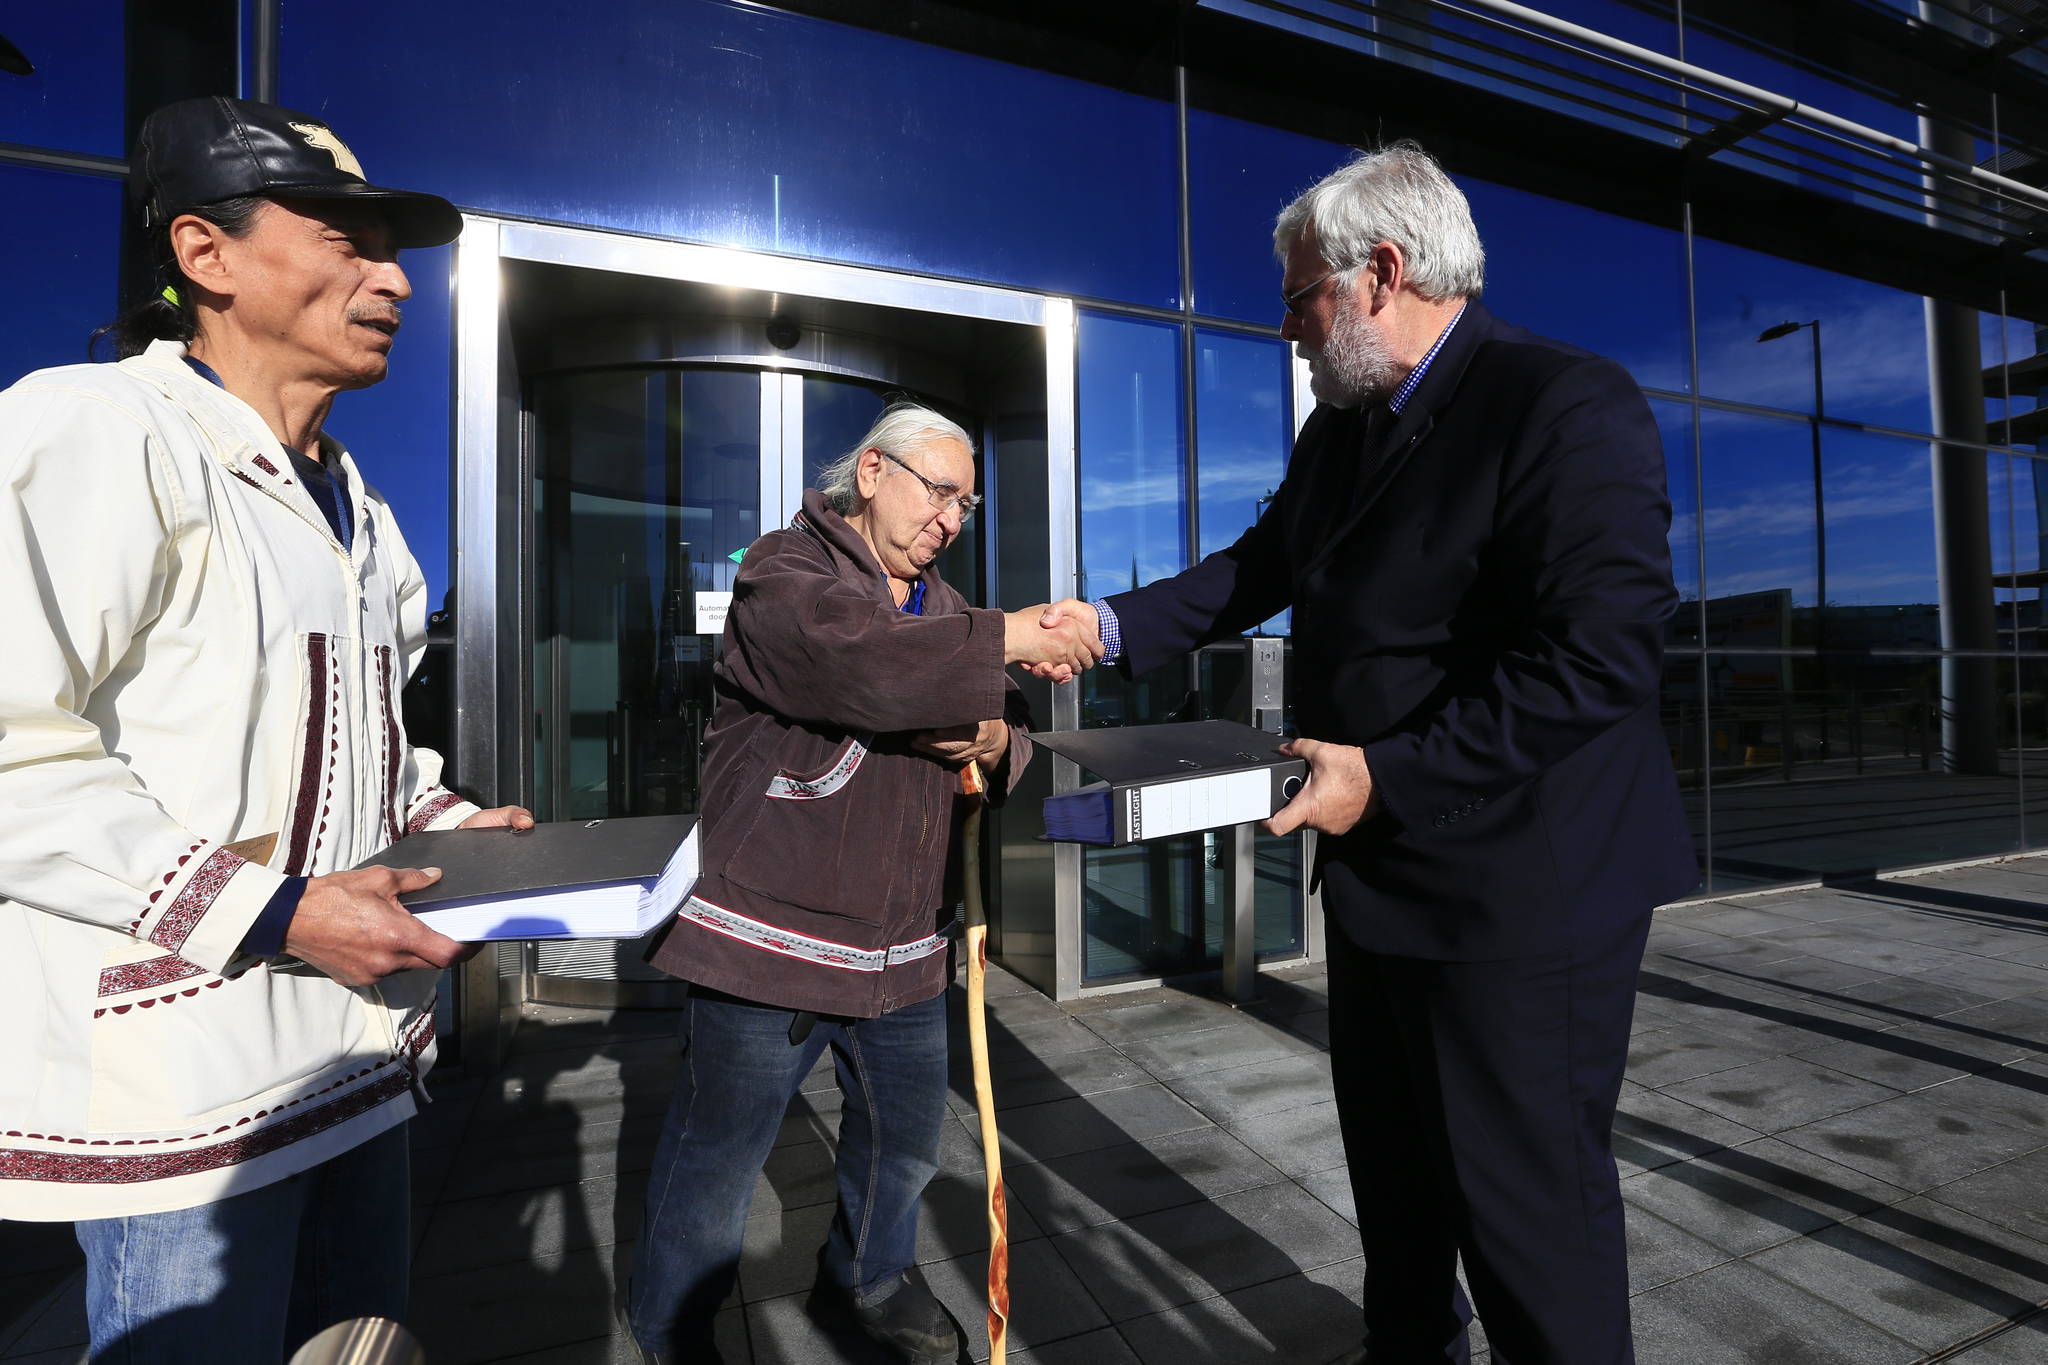 George Edwardson, board member for Inuit Circumpolar Council-Alaska and President of the Inupiat Community of the Arctic Slope (ICAS) hands the first of three binders holding over 104,000 signatures on an international petition calling for Carnival Corporation to end its use of heavy fuel oil in the Arctic and Subarctic to Tom Strang, Senior Vice President of Maritime Affairs for cruise industry giant. In July this year, the Inuit Circumpolar Council issued a formal Declaration calling for a phaseout of heavy fuel oil in the region. (Courtesy Photo | Jiri Rezac via Stand.earth)